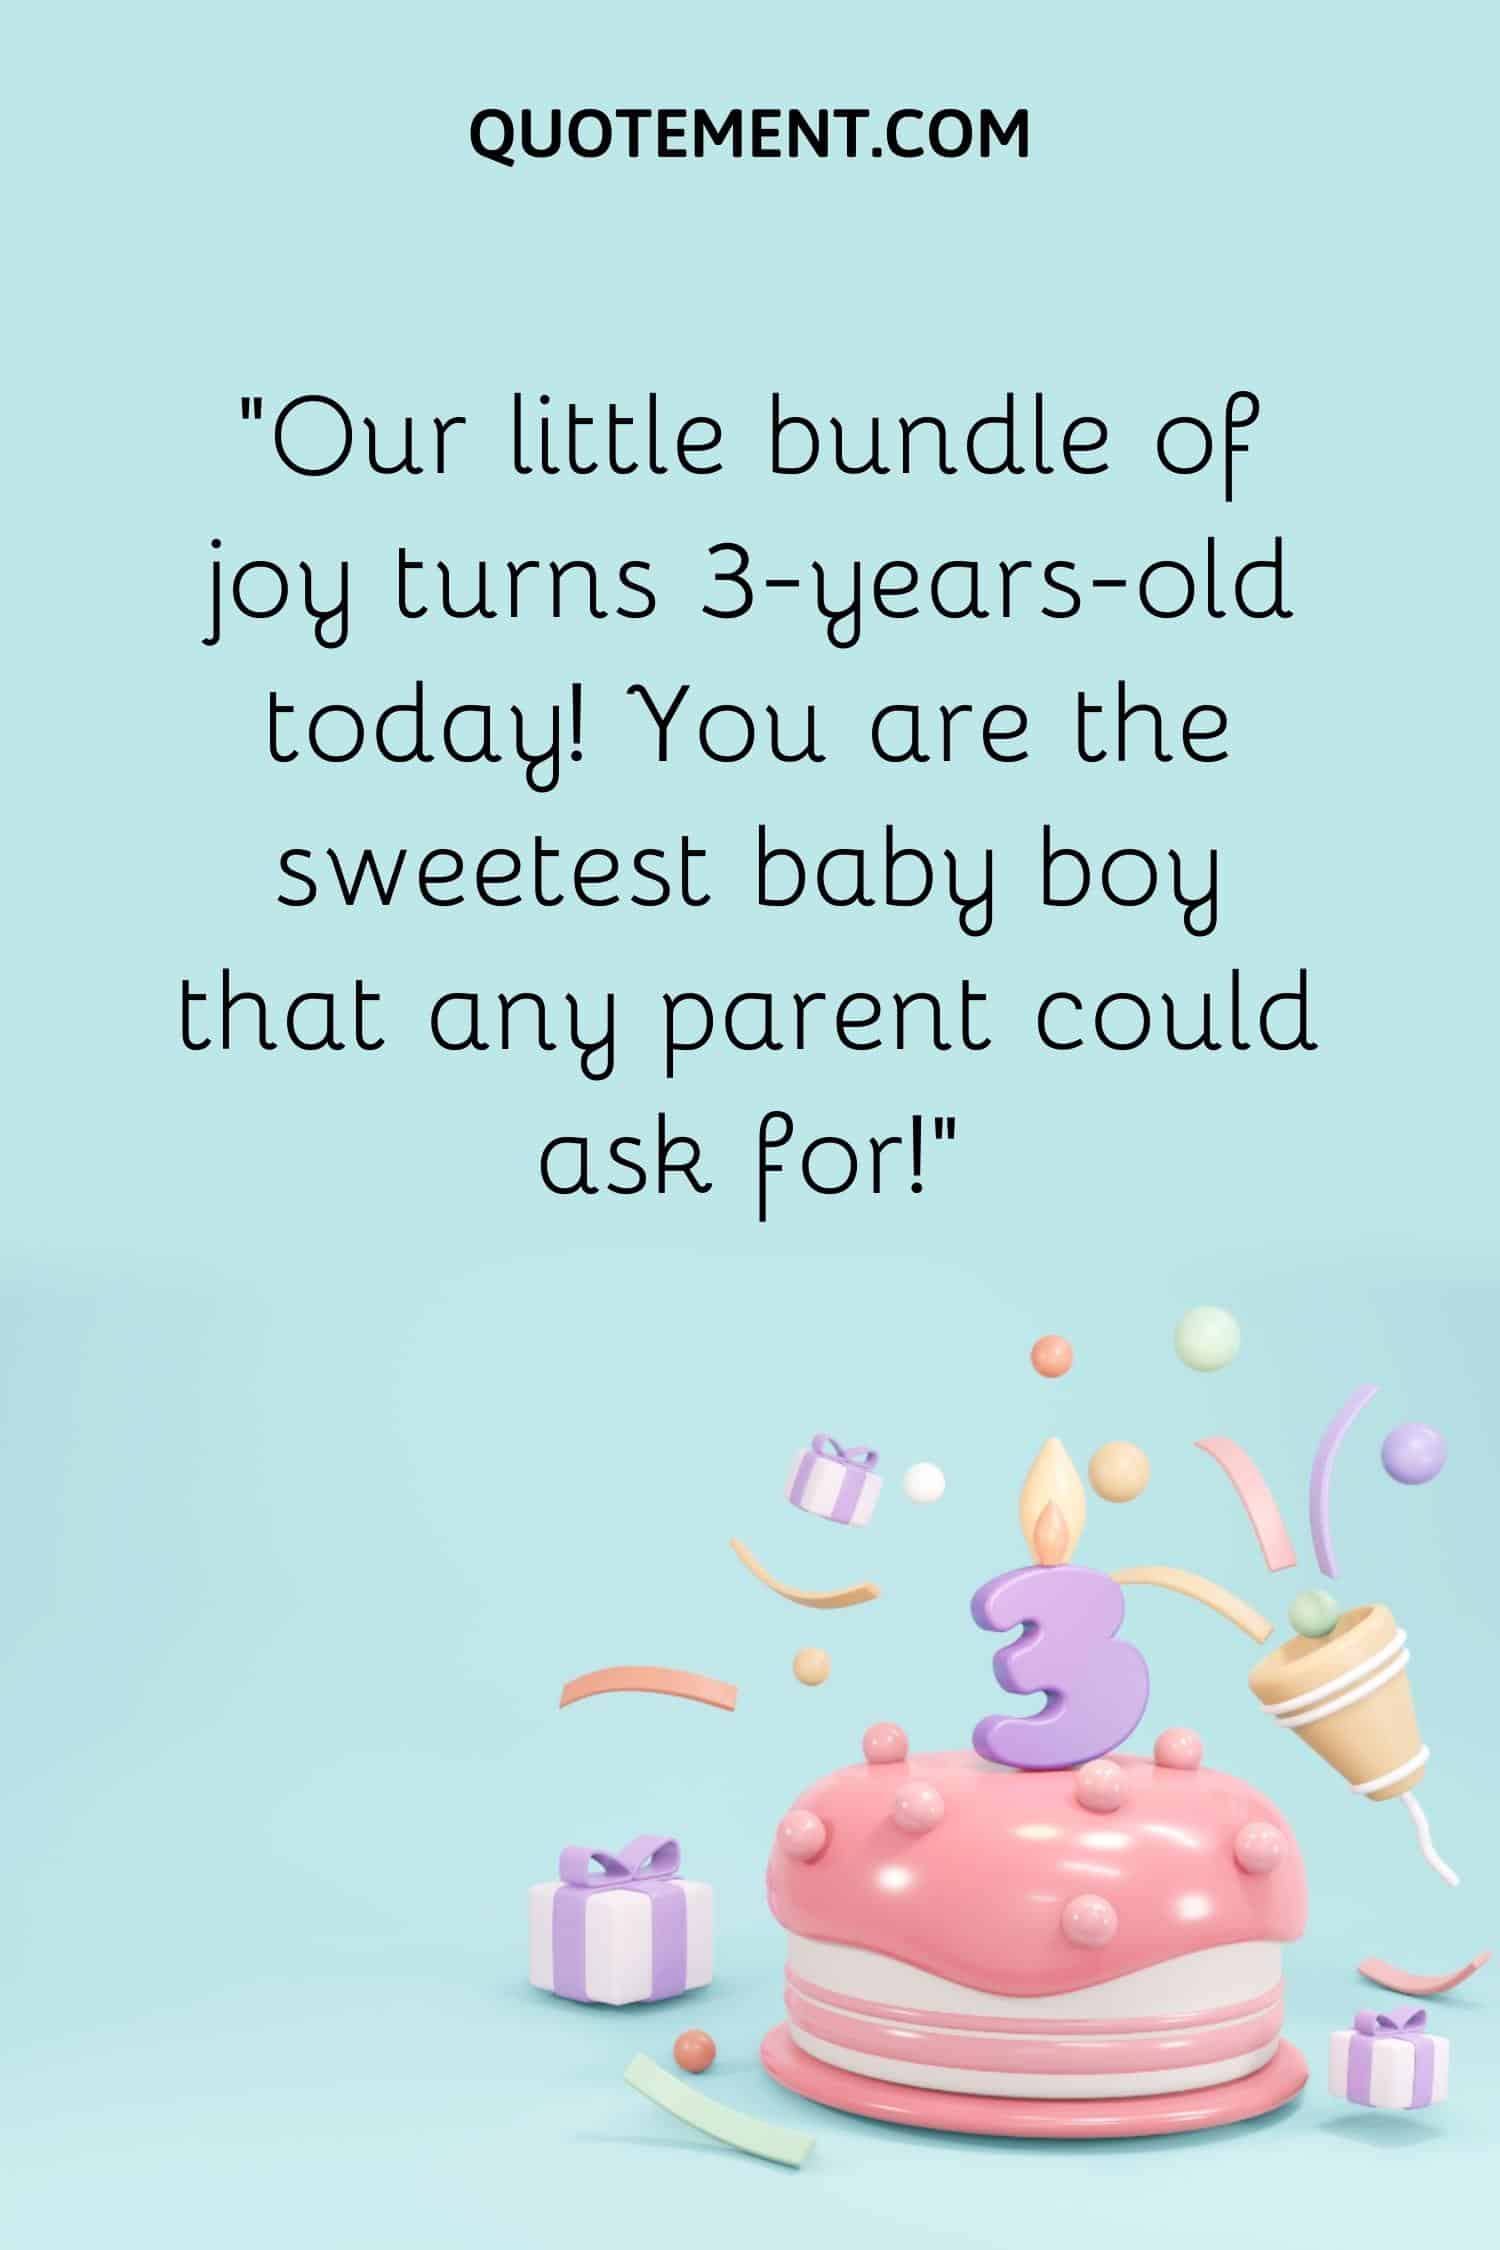 “Our little bundle of joy turns 3-years-old today! You are the sweetest baby boy that any parent could ask for!”